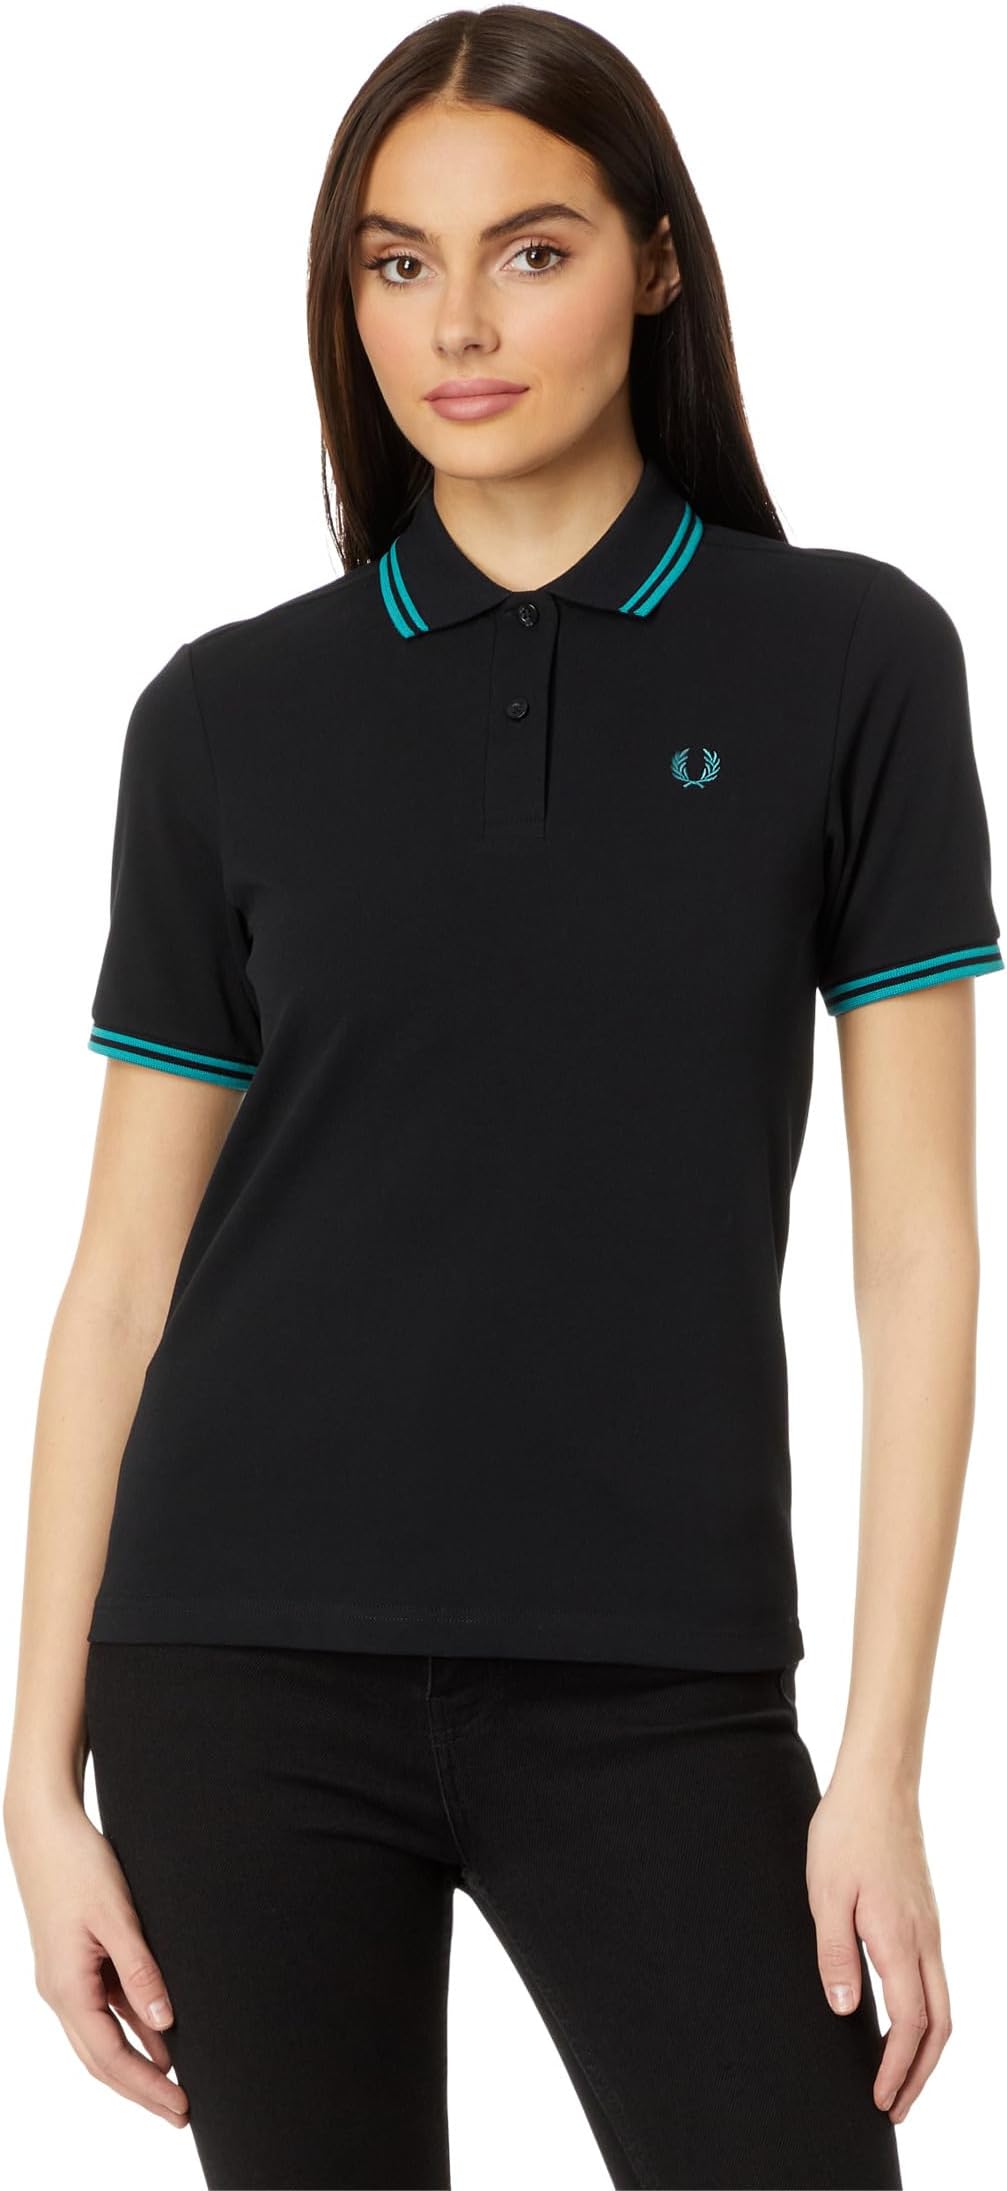 Рубашка-поло Twin Tipped Fred Perry Shirt Fred Perry, черный футболка поло fred perry twin tipped белый